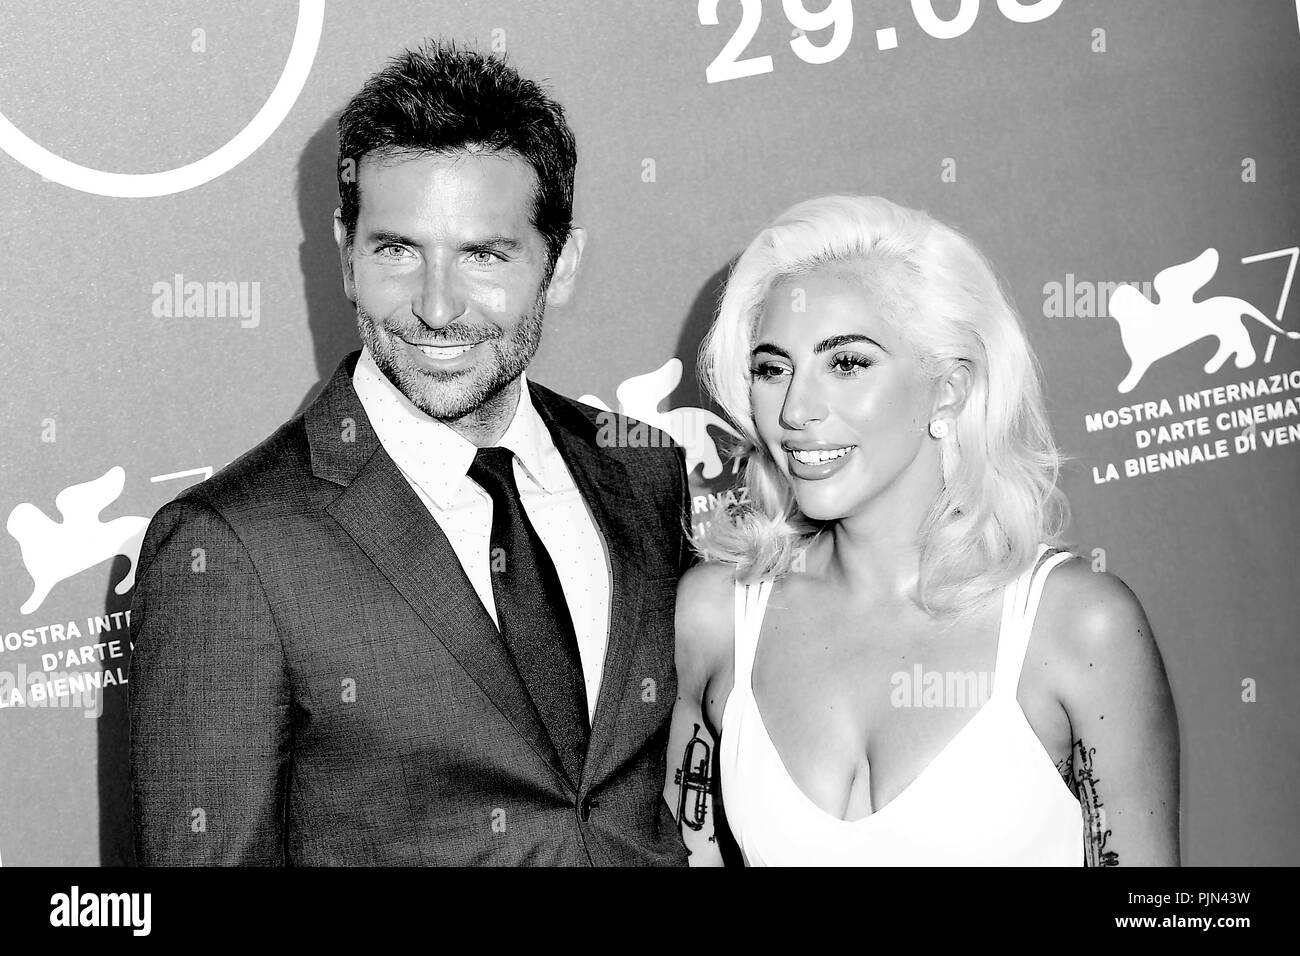 Bradley Cooper and Lady Gaga attend A Star Is Born photocall during the  75th Venice Film Festival, Venice, Italy. 31st August, 2018 © Paul Treadway  Stock Photo - Alamy